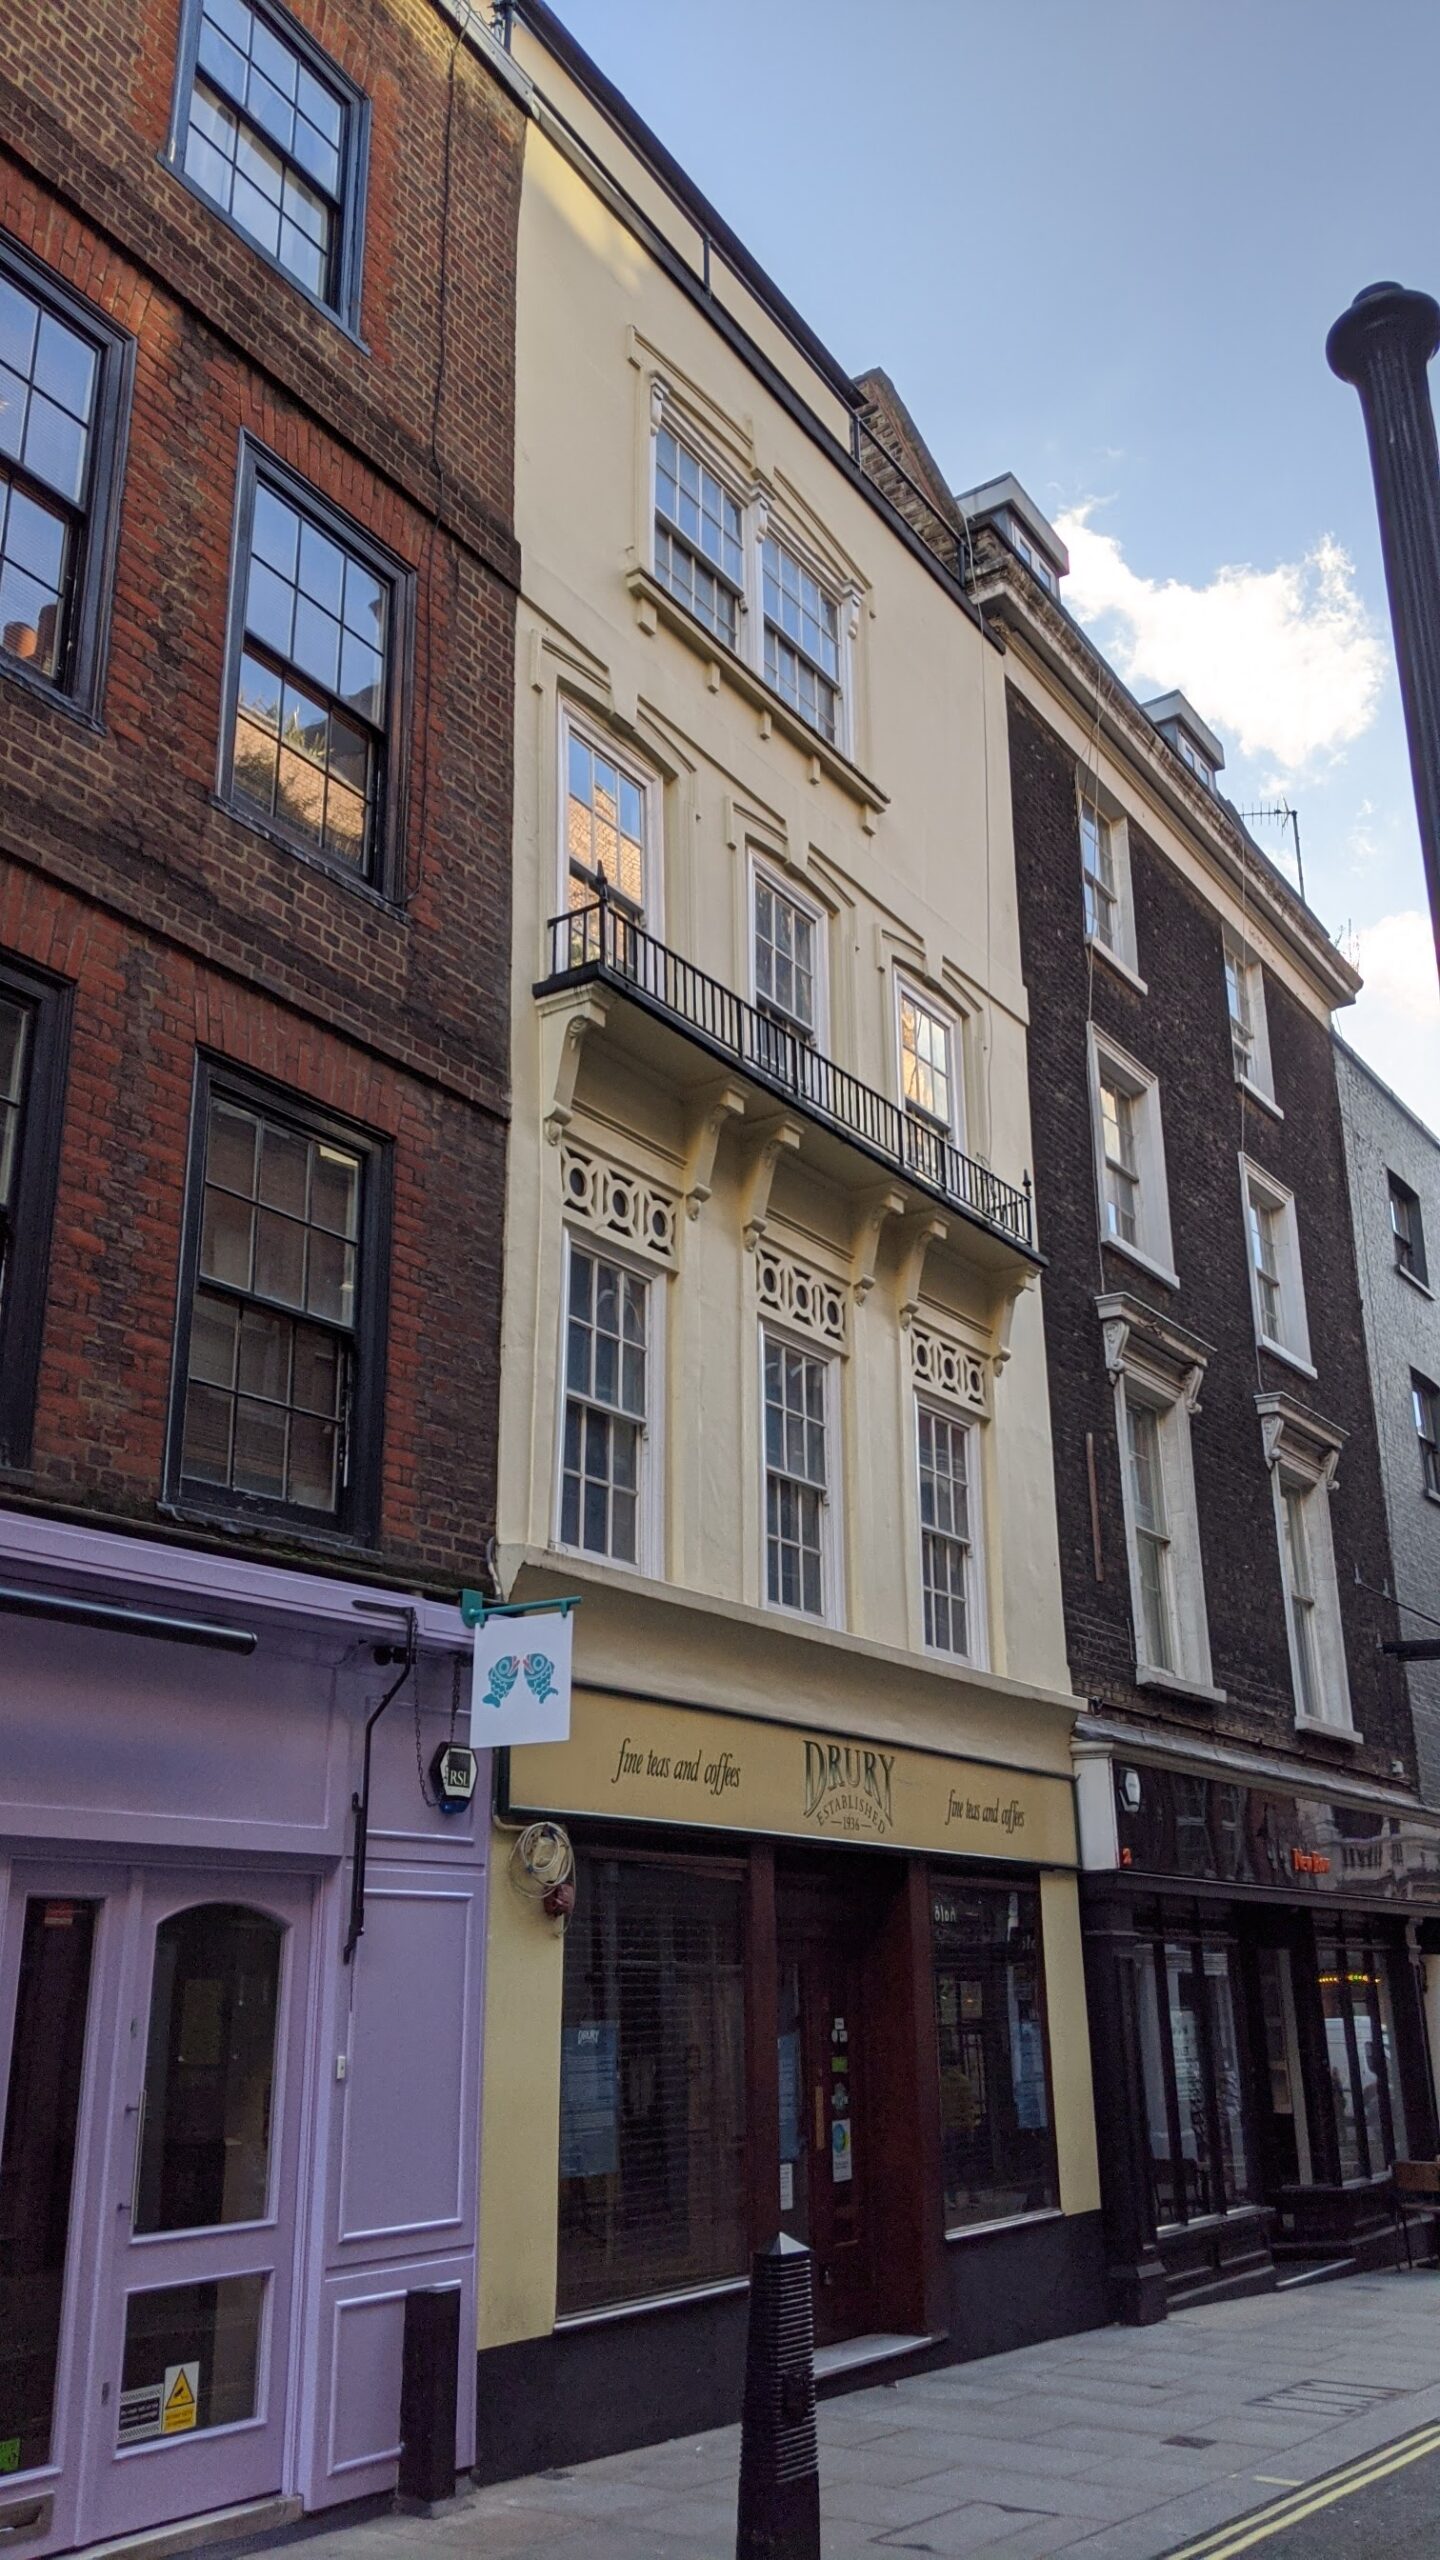 3 New Row & 14a Goodwin’s Court, London WC2